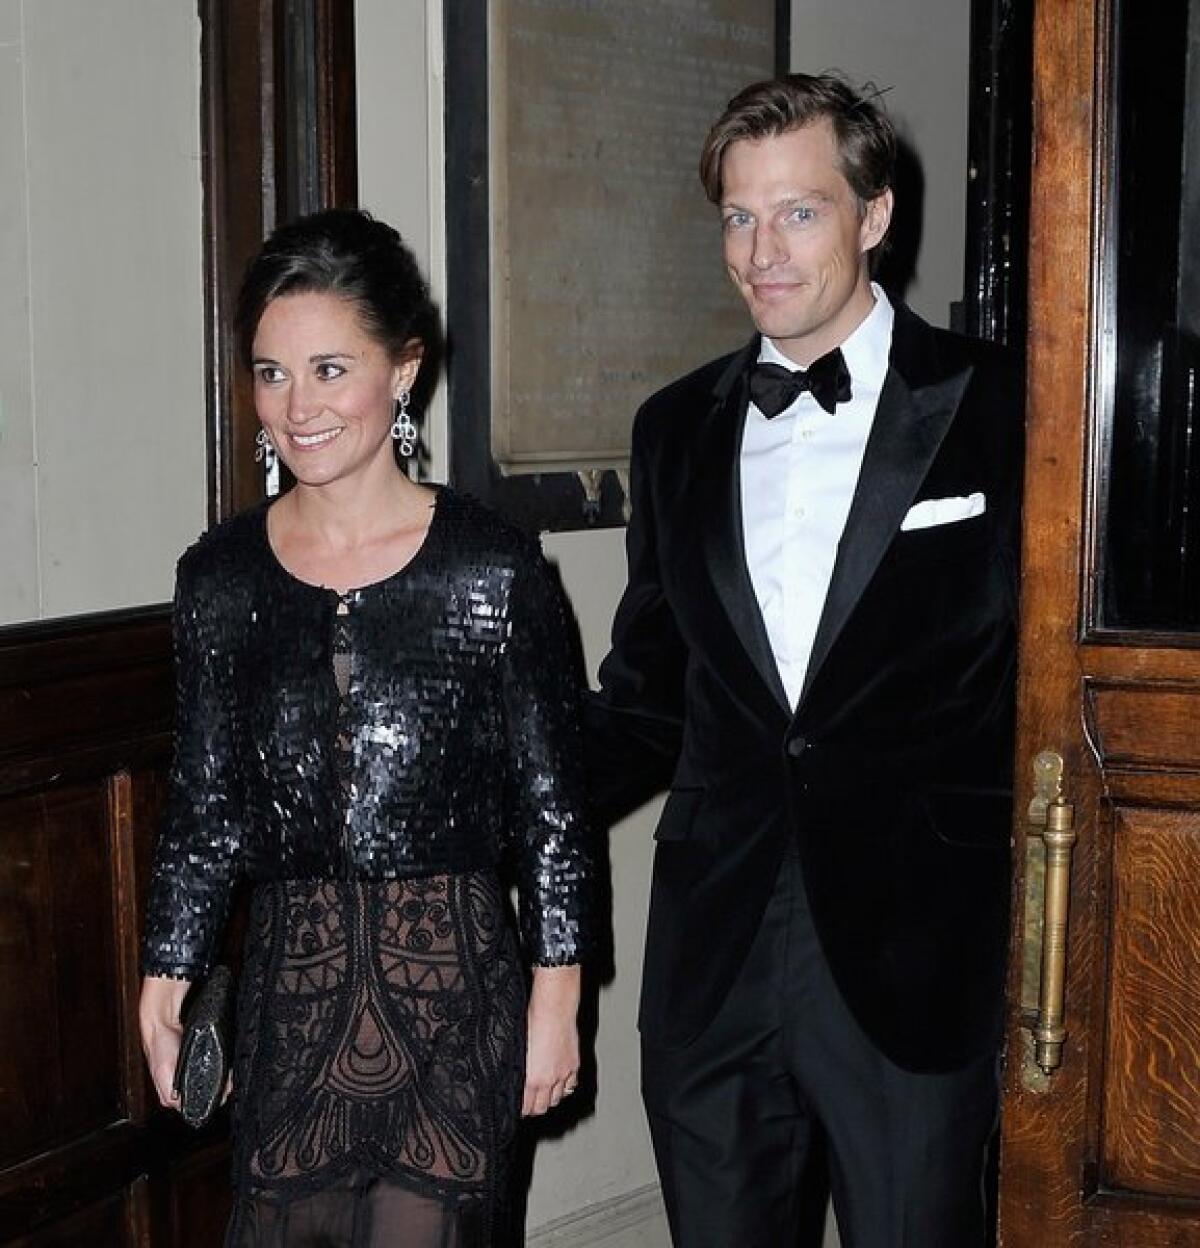 Pippa Middleton and Nico Jackson attend the Sugarplum Ball in London last month.